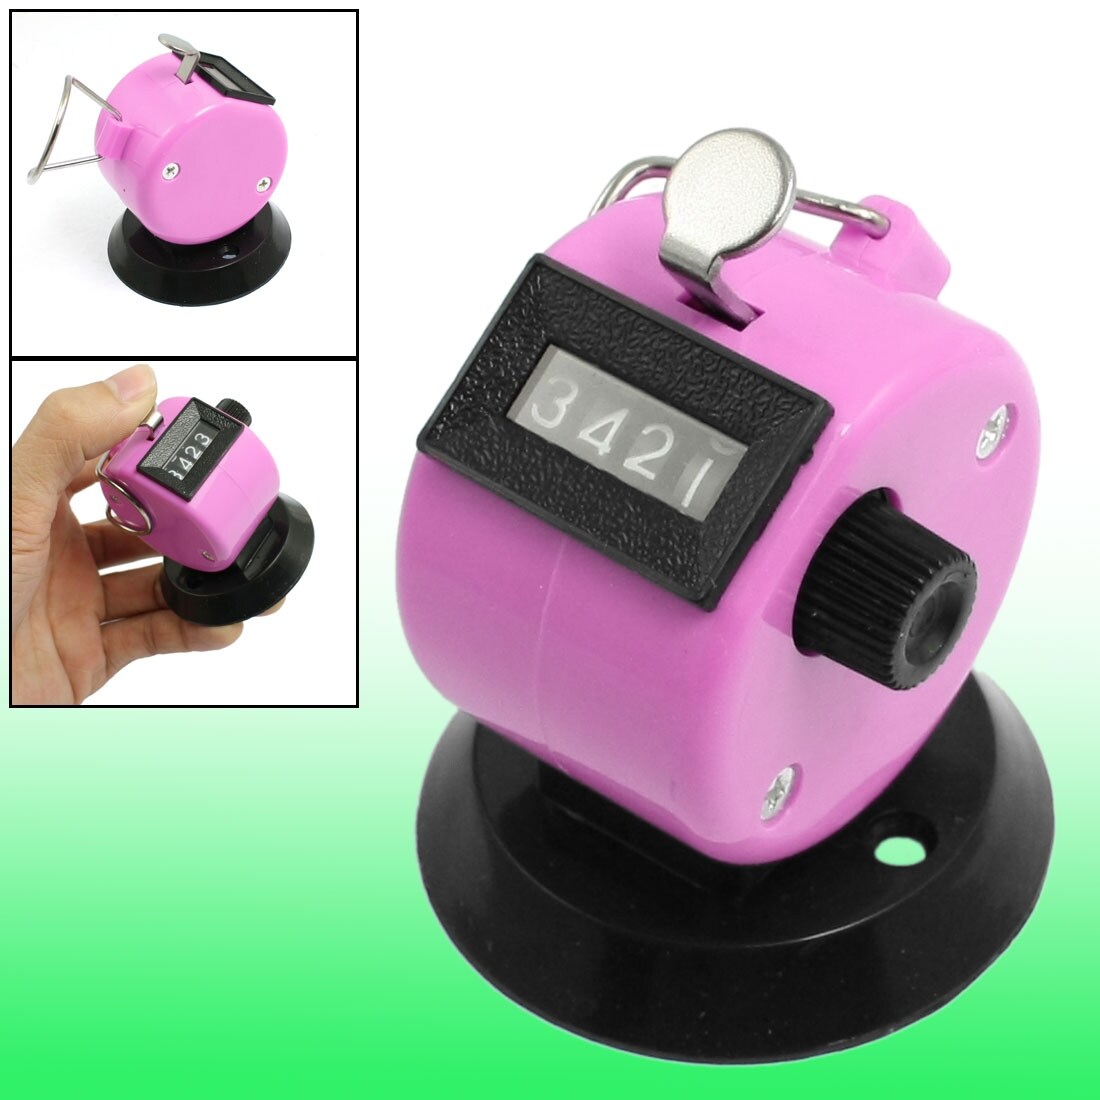 Manual Counter 4 Digit Mechanical Palm Click Counter Plastic